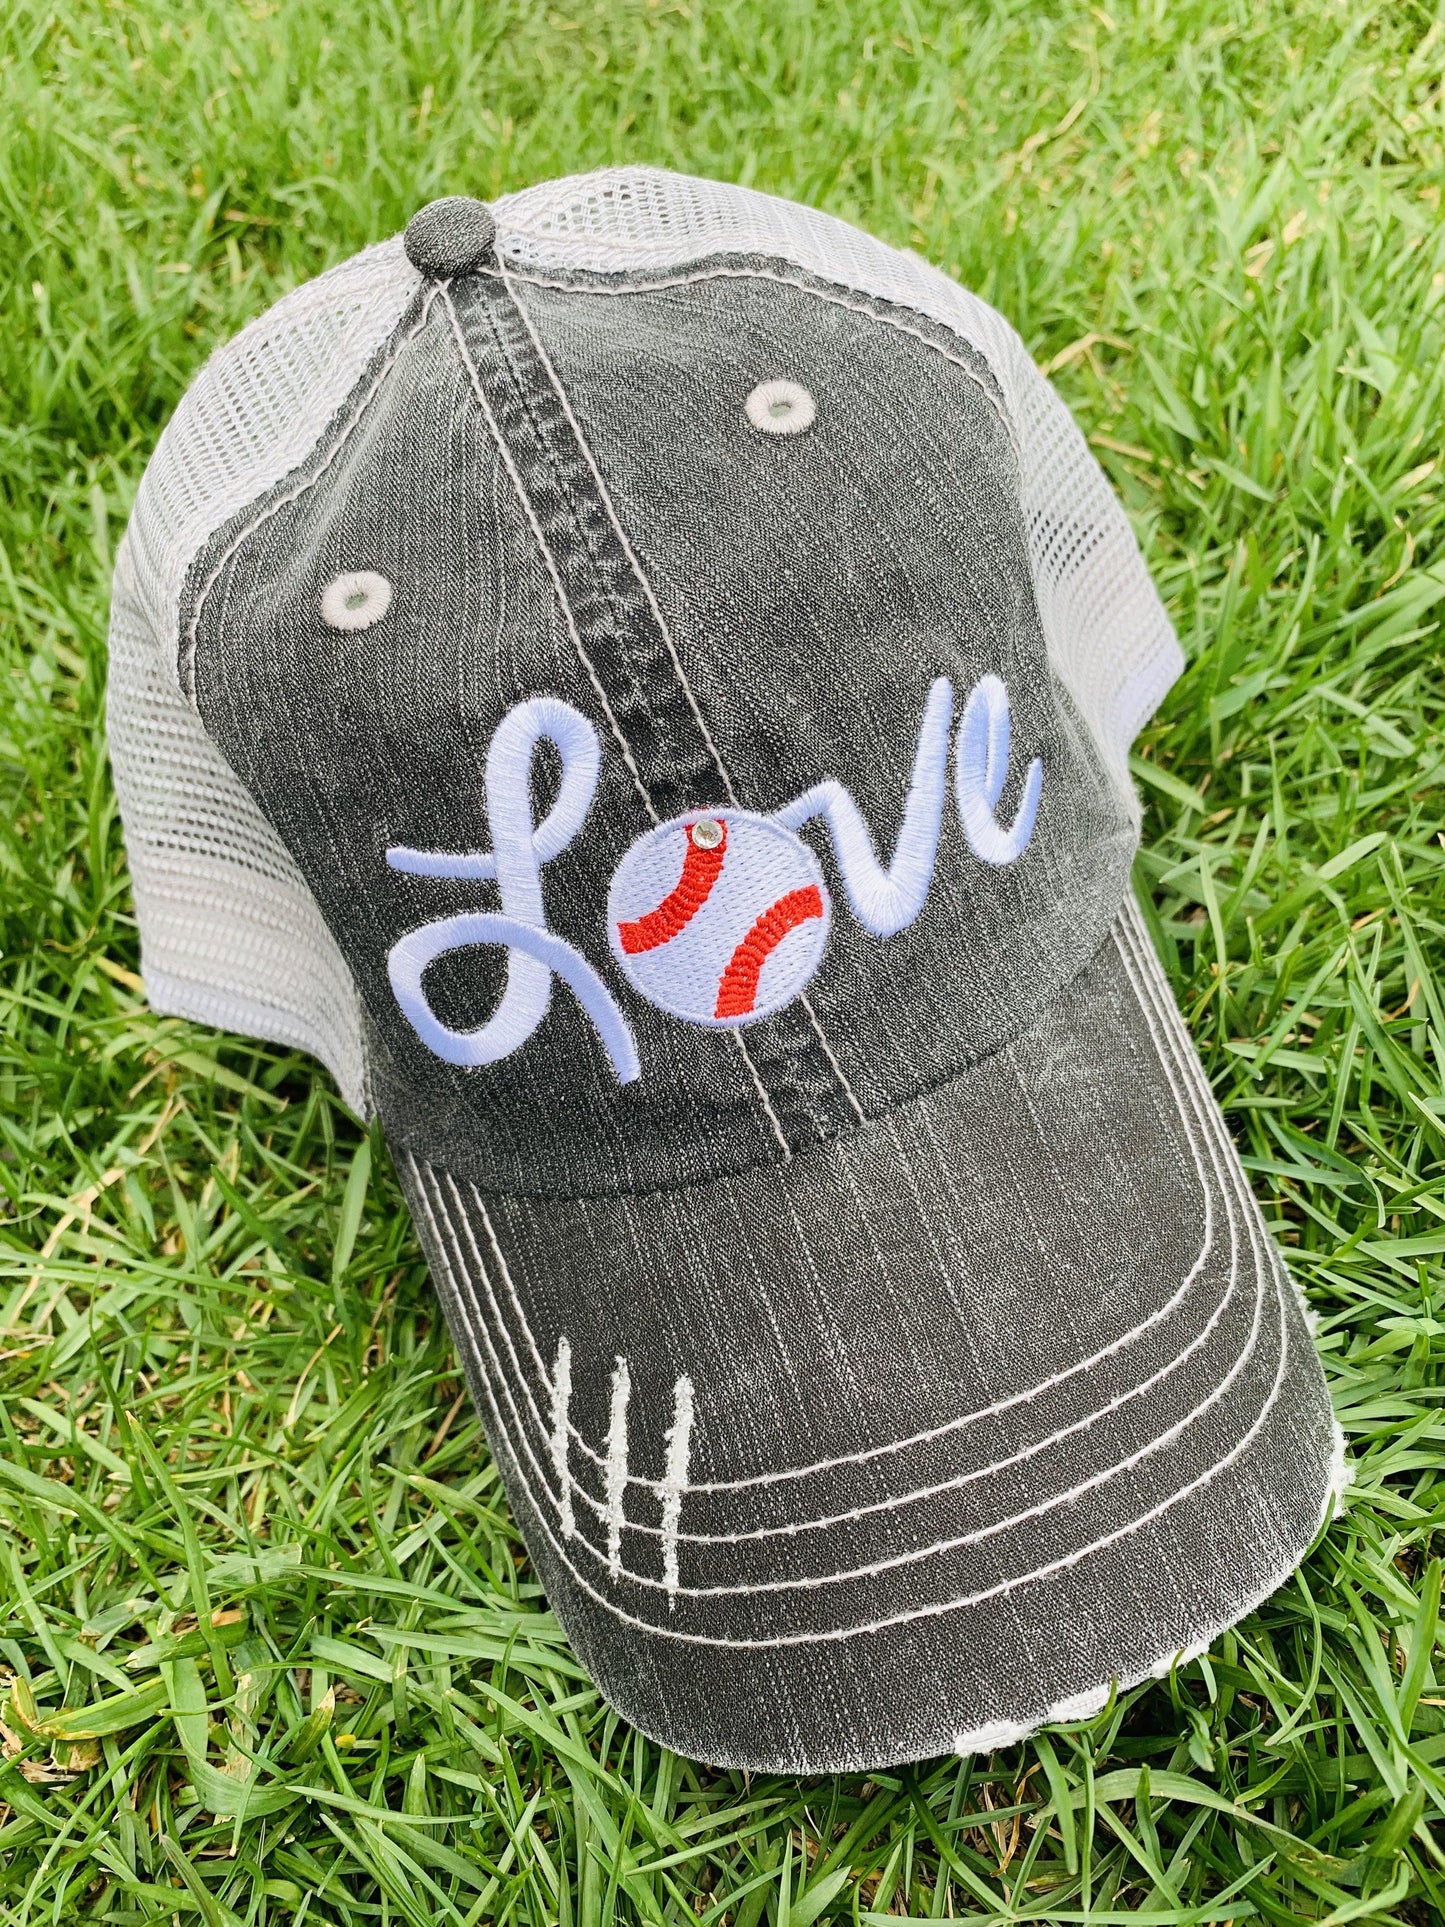 Baseball hat! Love ~ Embroidered women's trucker cap ~ Adjustable ~ Distressed - Stacy's Pink Martini Boutique